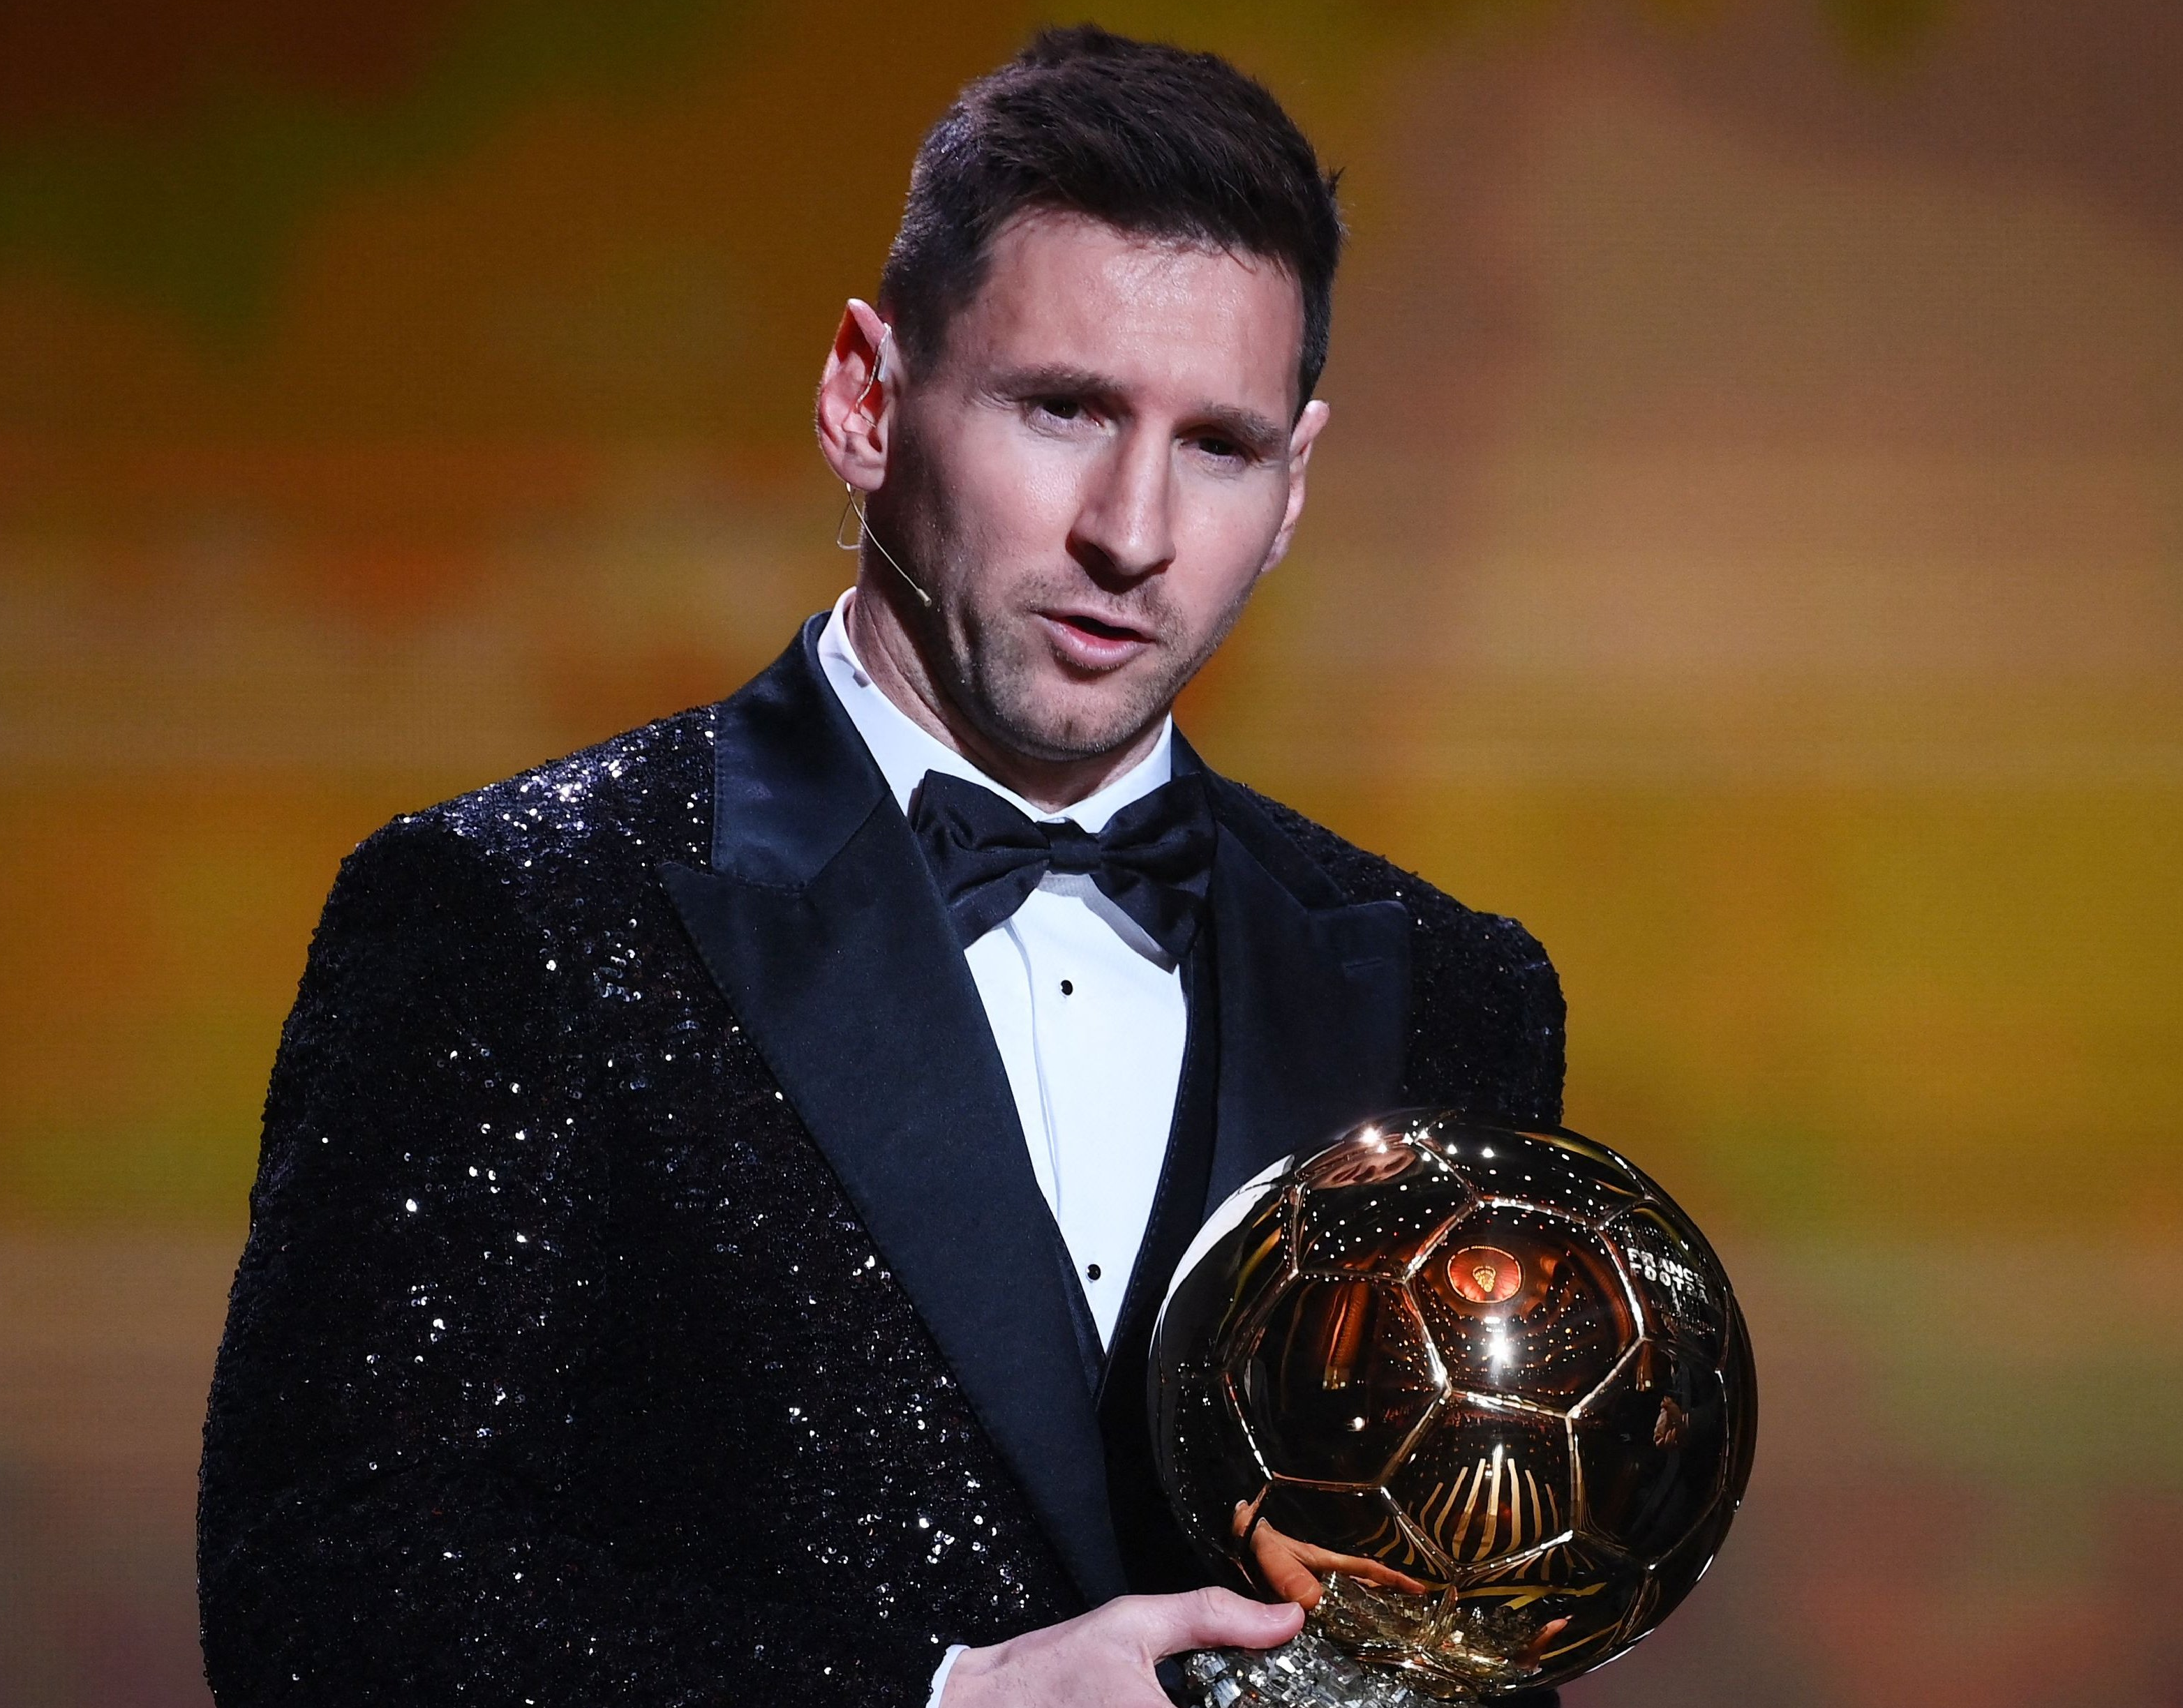 Ballon d'Or - Lionel Messi wins award as best player in world football for seventh time